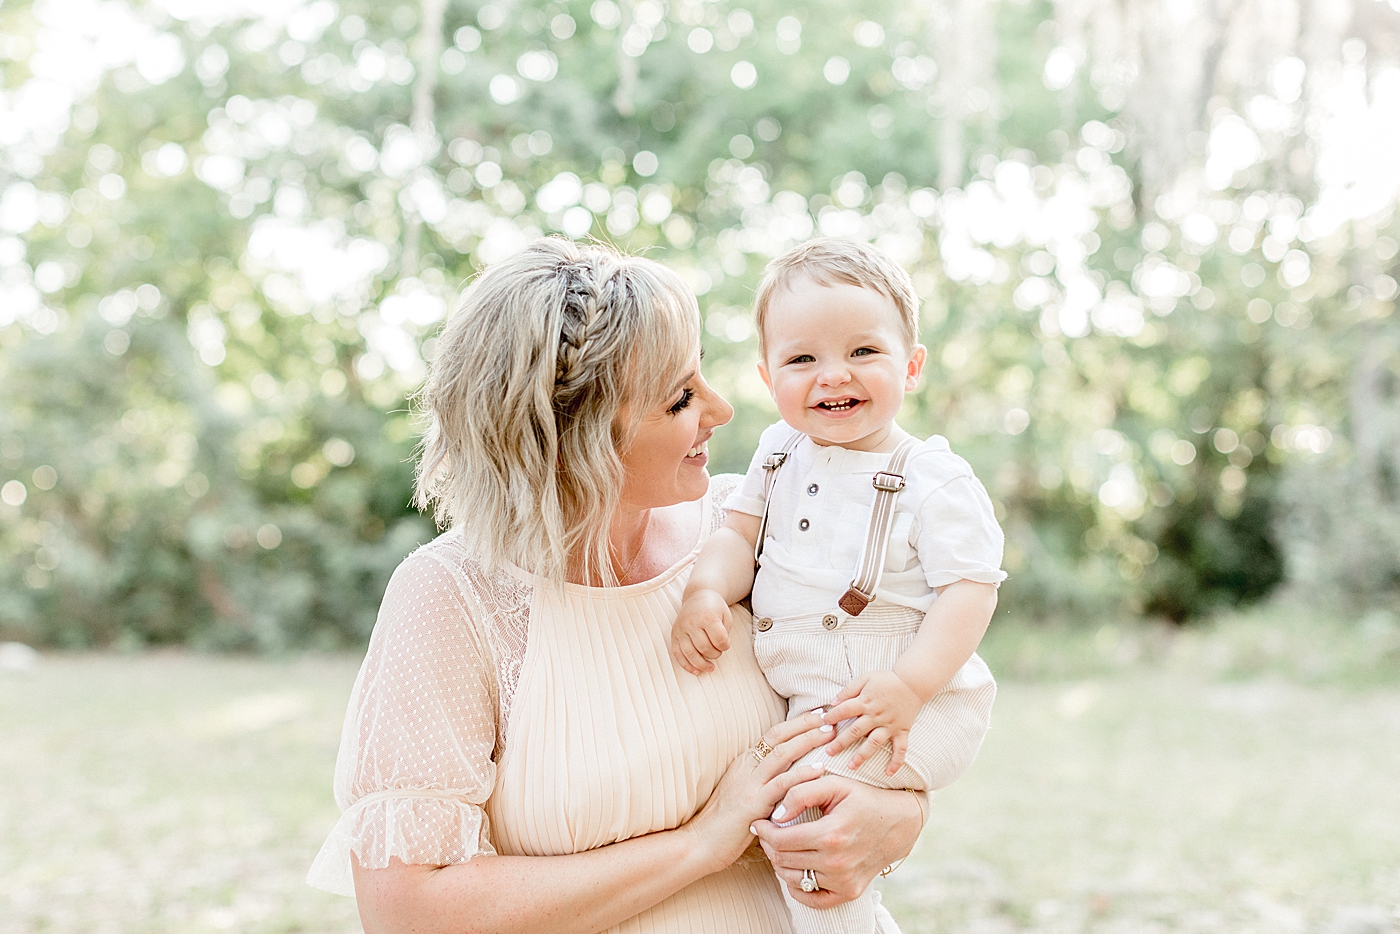 Mom is looking at one year old son that's smiling so big! Photo by Brittany Elise Photography.